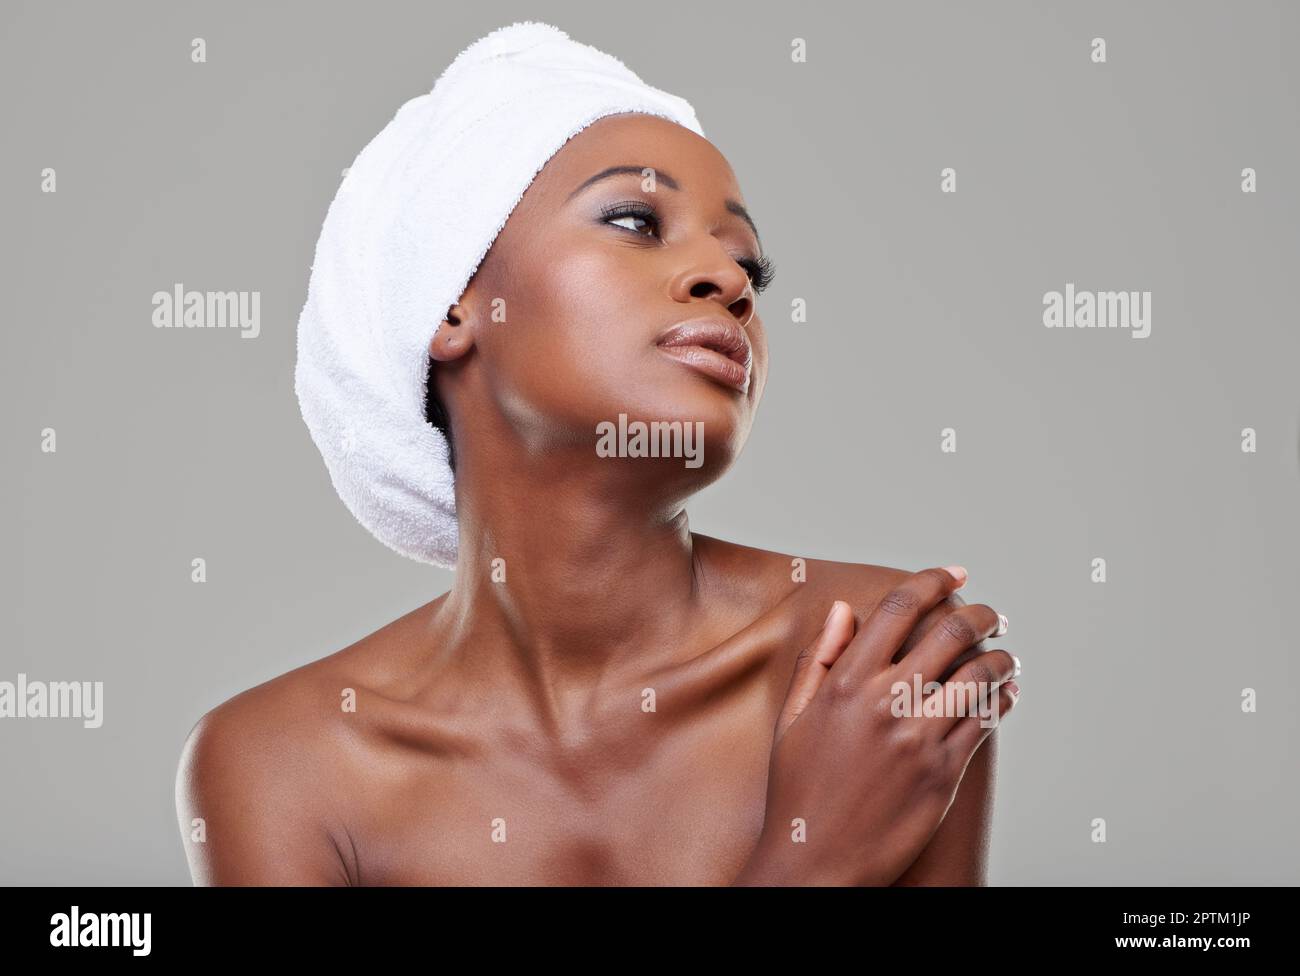 Statuesque beauty. Beauty shot of a young woman with a towel around her head posing in studio Stock Photo